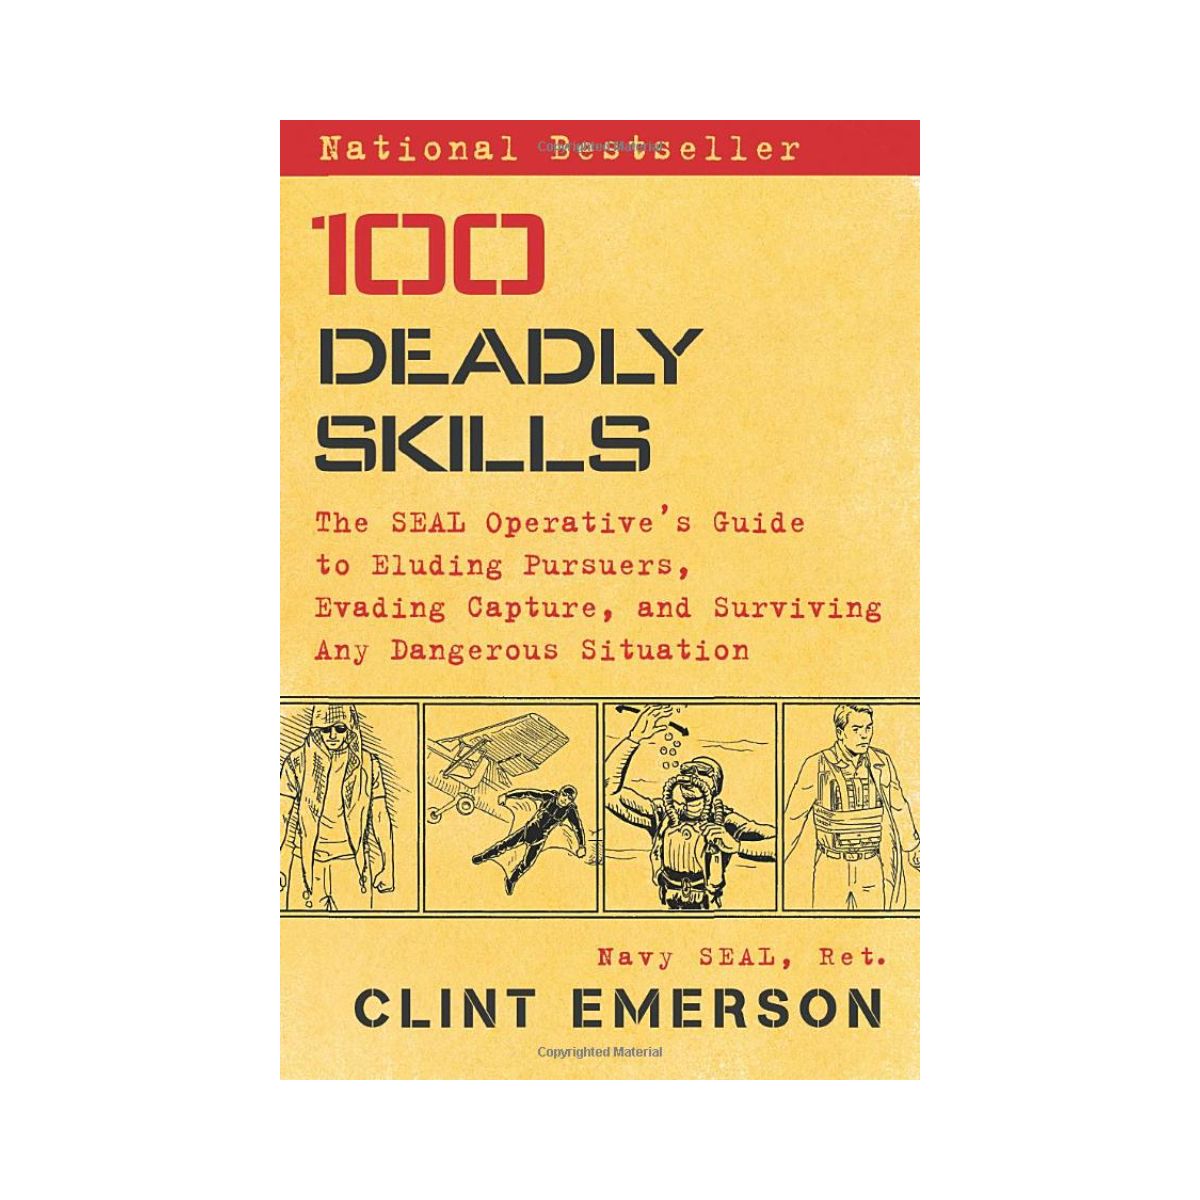 100 Deadly Skills by Clint Emerson